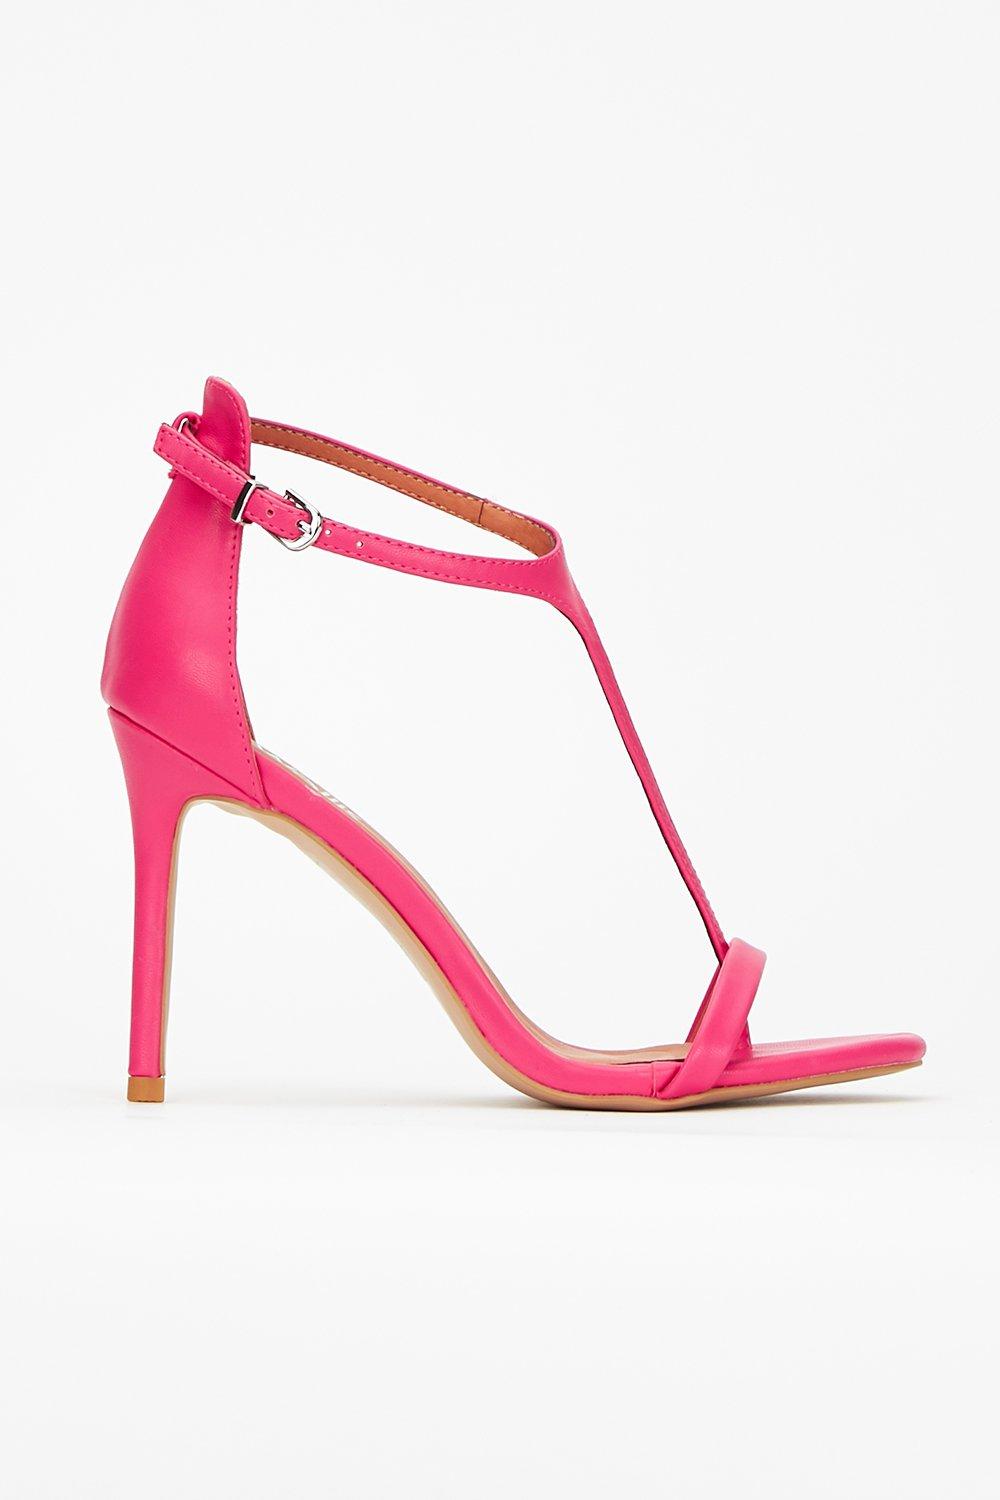 Add A Stylish Pop Of Colour To Your Look With These Sleek Pink Heels. An On-Trend Barely There Design And Classic T-Bar Will Bring Instant Style To Your Outfit, Whilst Their Slim Heel Keeps Them Formal And Flattering.   Heel Height: 100Mm Stiletto Heeled